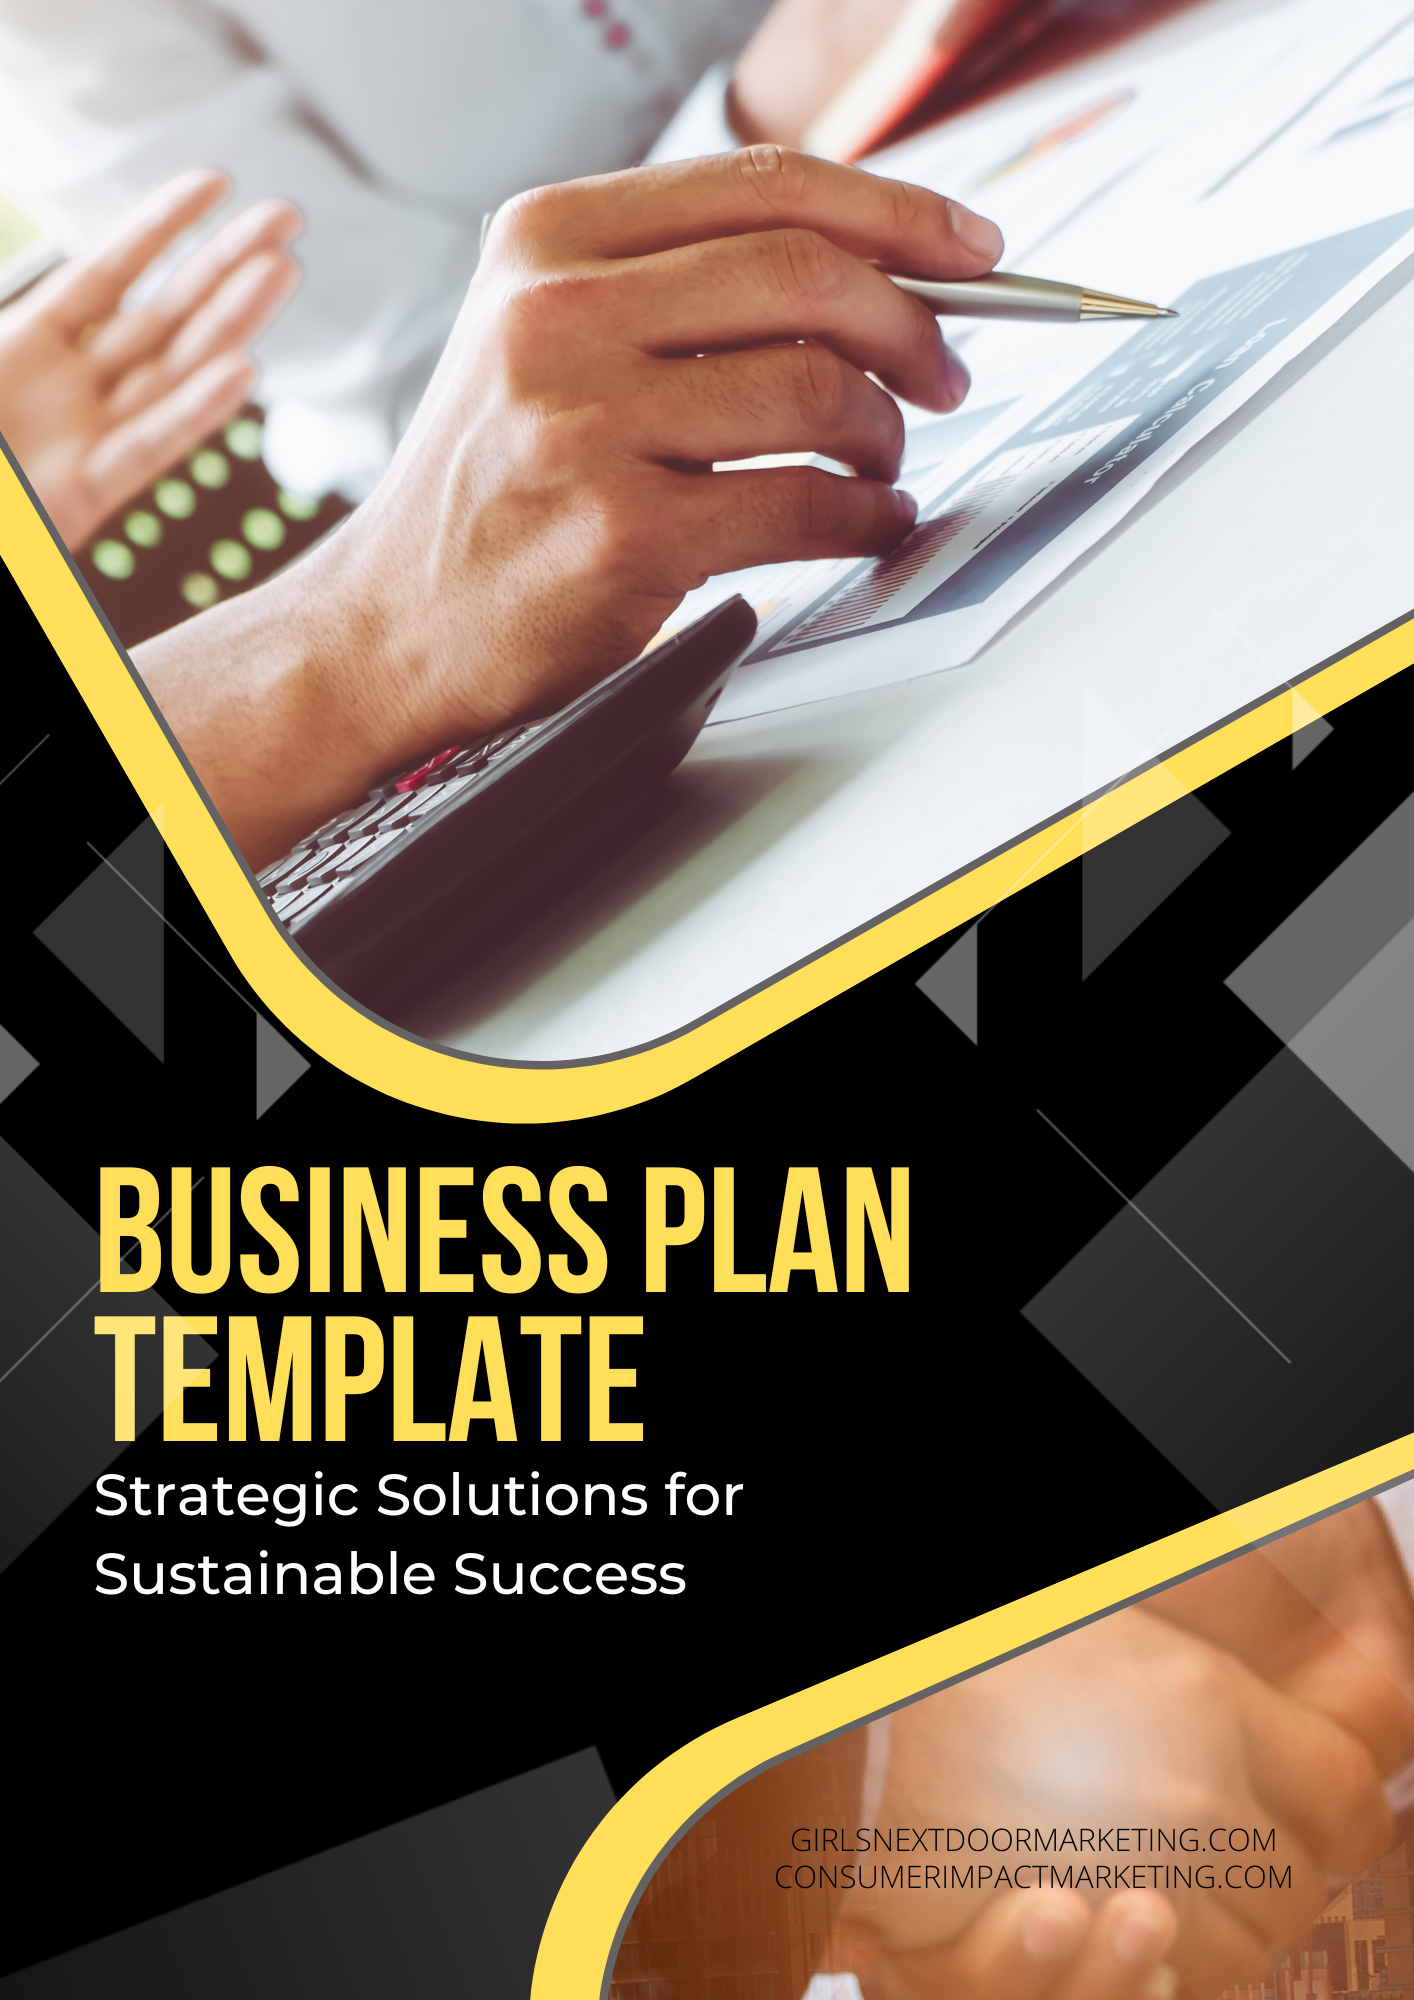 Business Plan Template Workbook - 30 Pages